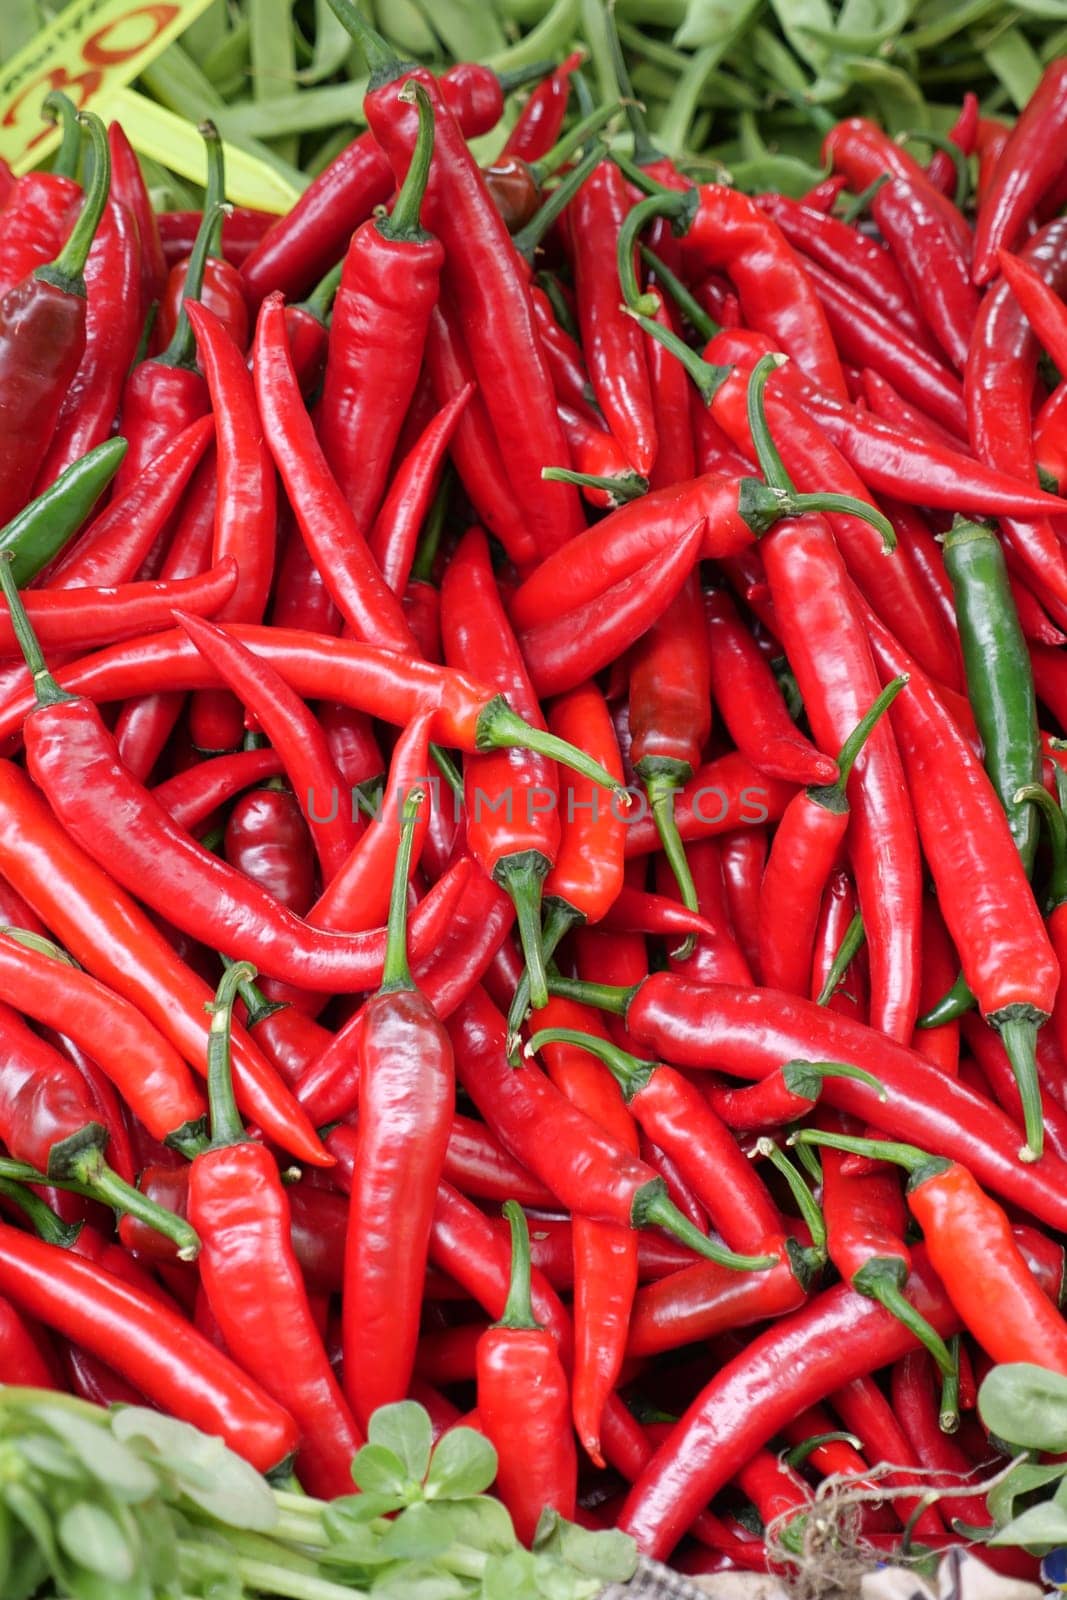 red chili pepper display for sale in singapore retail market by towfiq007